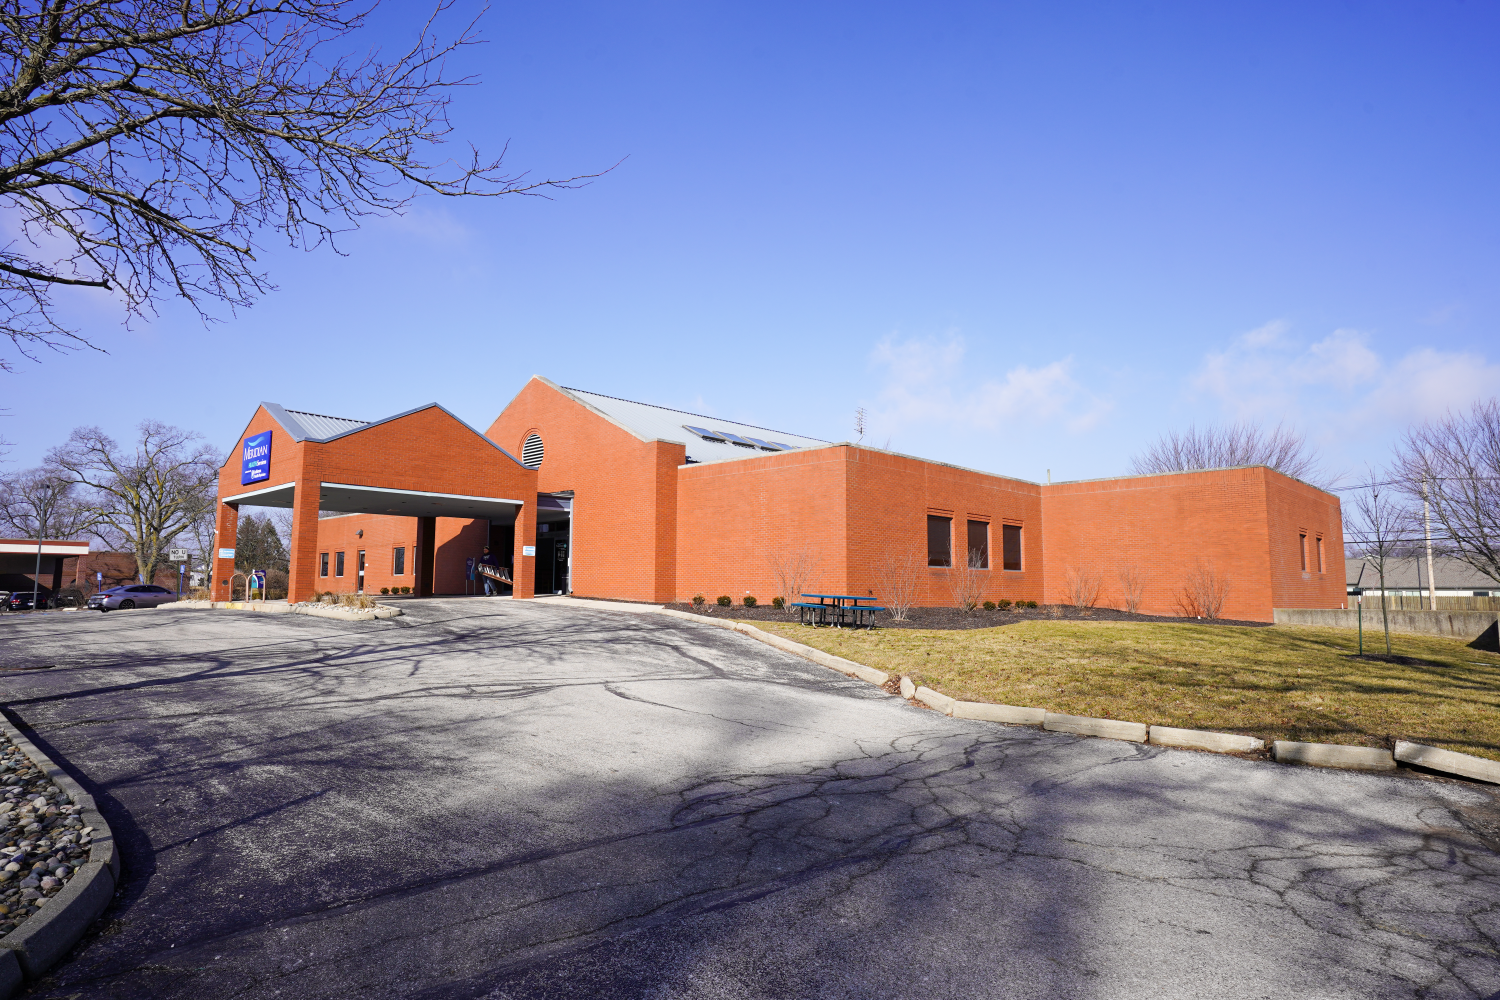 Sturges Property Group - Turnkey medical building for sale or lease at 2622 Lake Avenue, Fort Wayne.